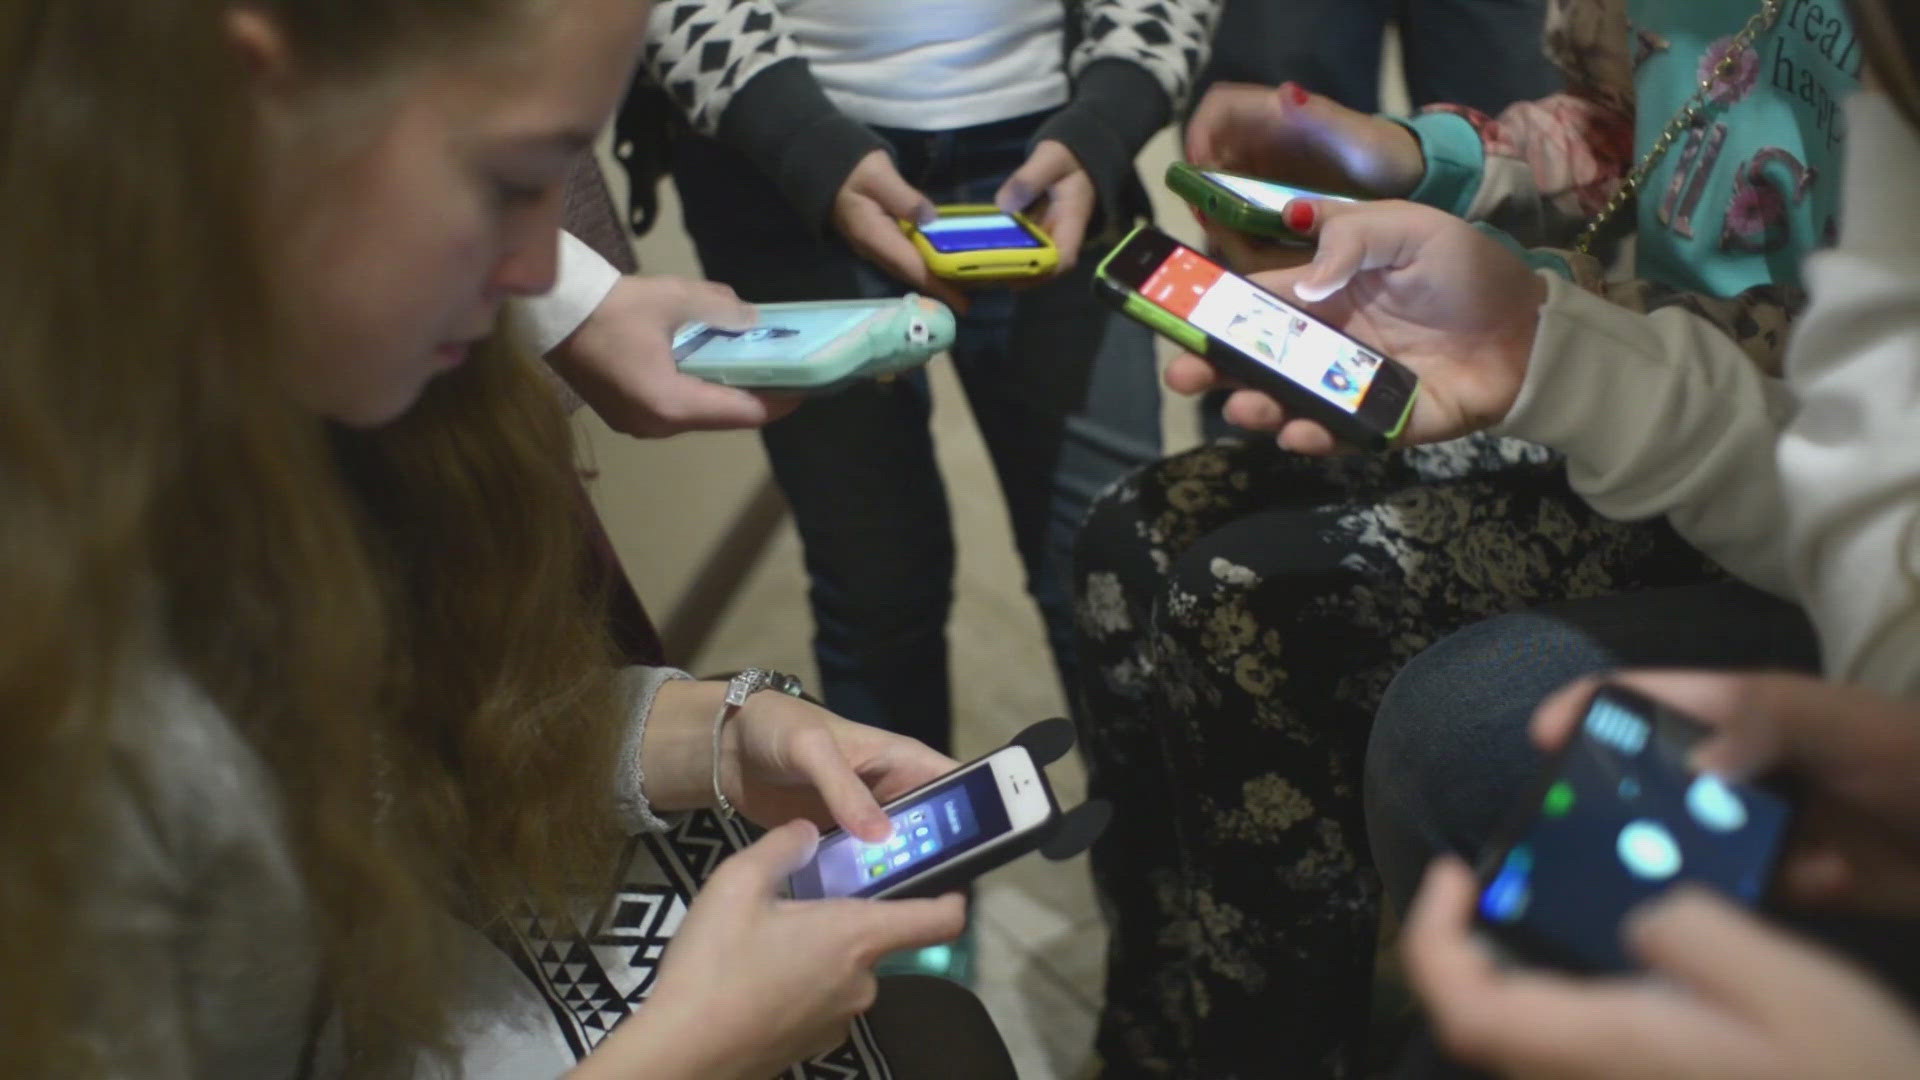 This school year, Parma implemented a district-wide policy, banning cell phone use in middle schools and in high school classrooms.